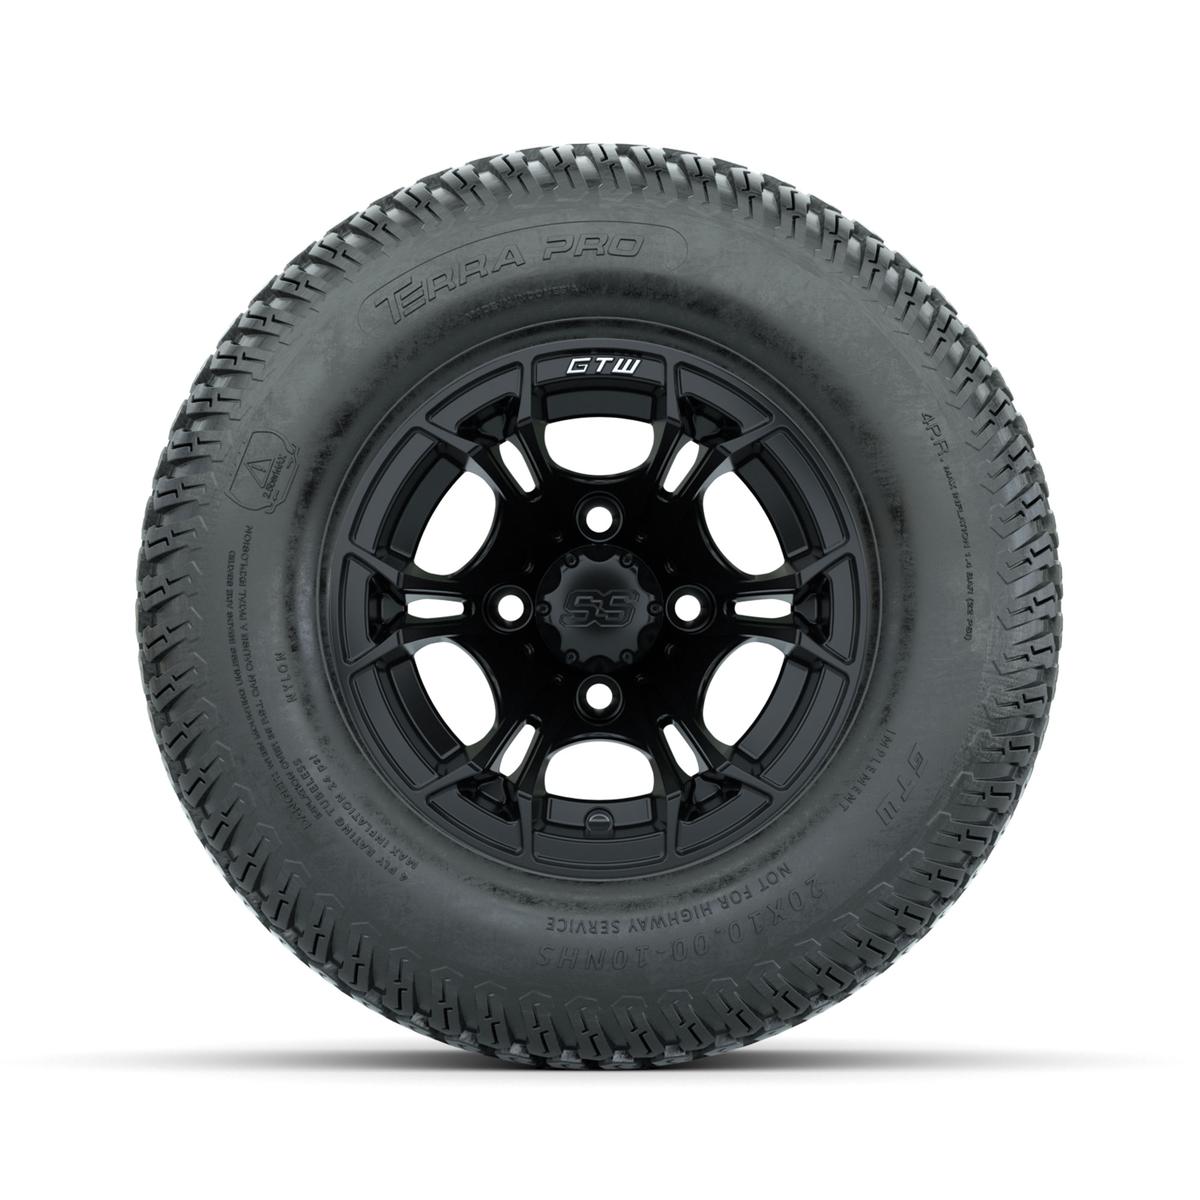 GTW Spyder Matte Black 10 in Wheels with 20x10-10 Terra Pro S-Tread Traction Tires – Full Set